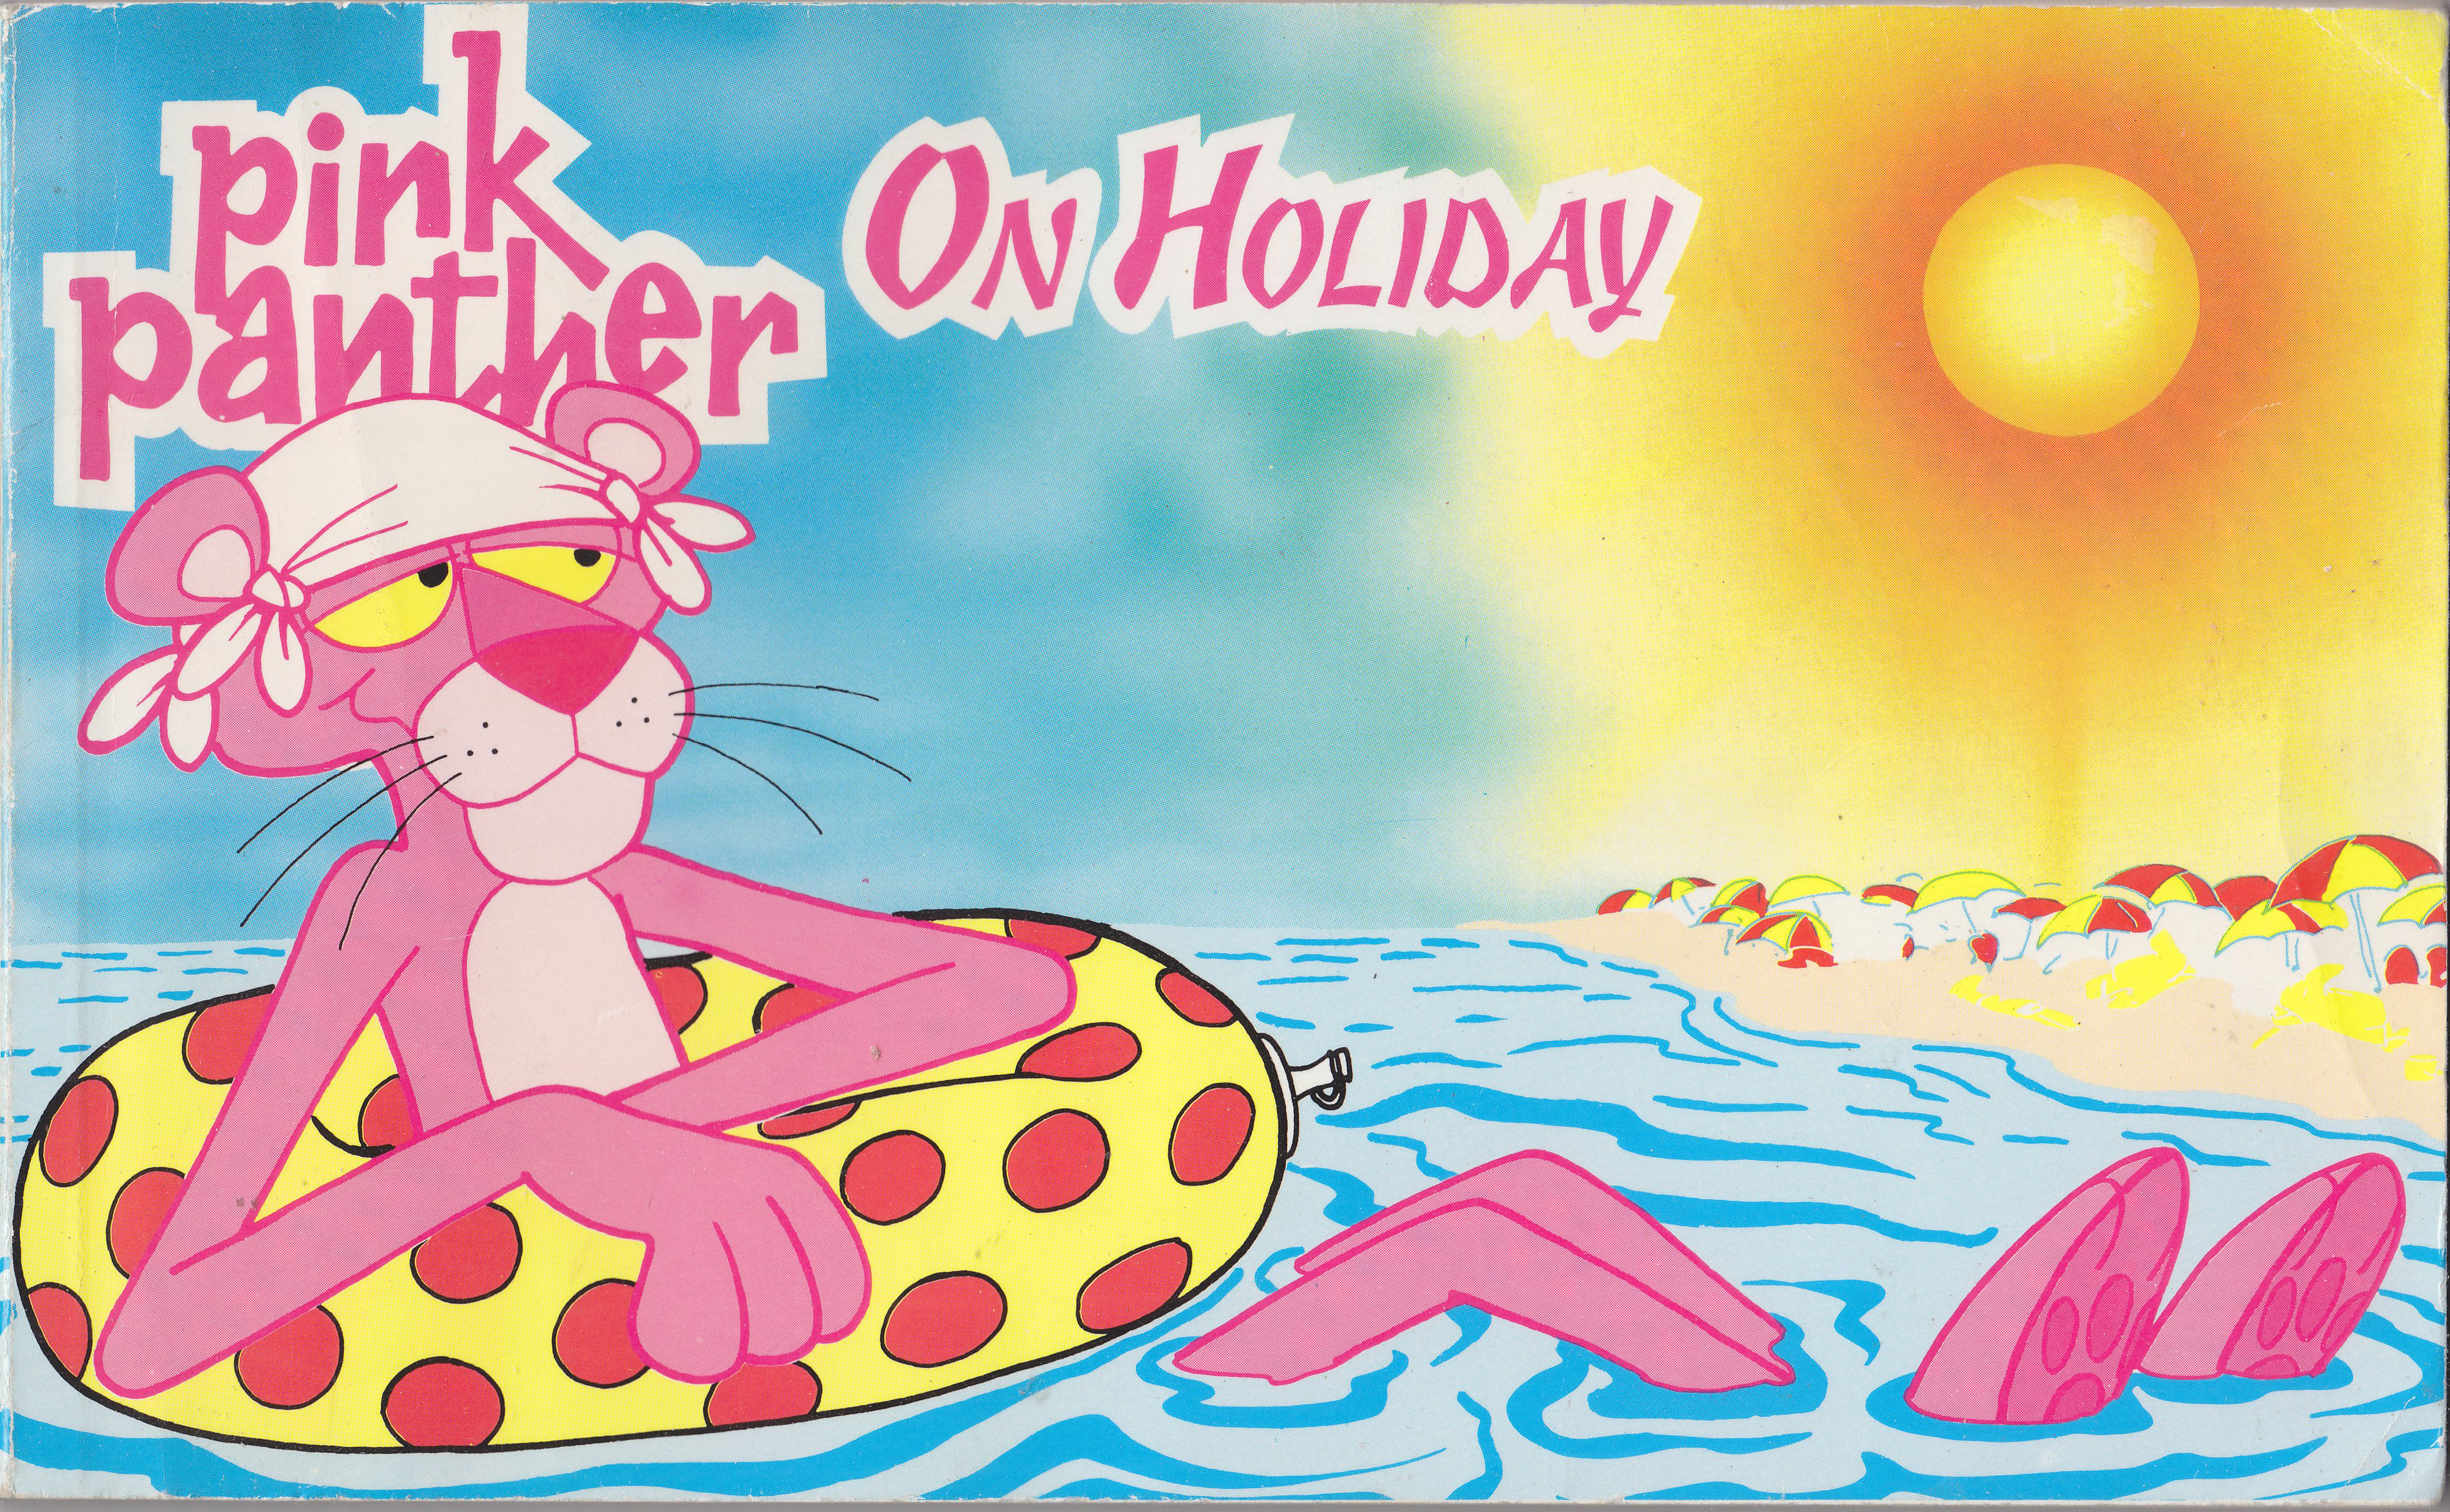 Pink Panther on holiday